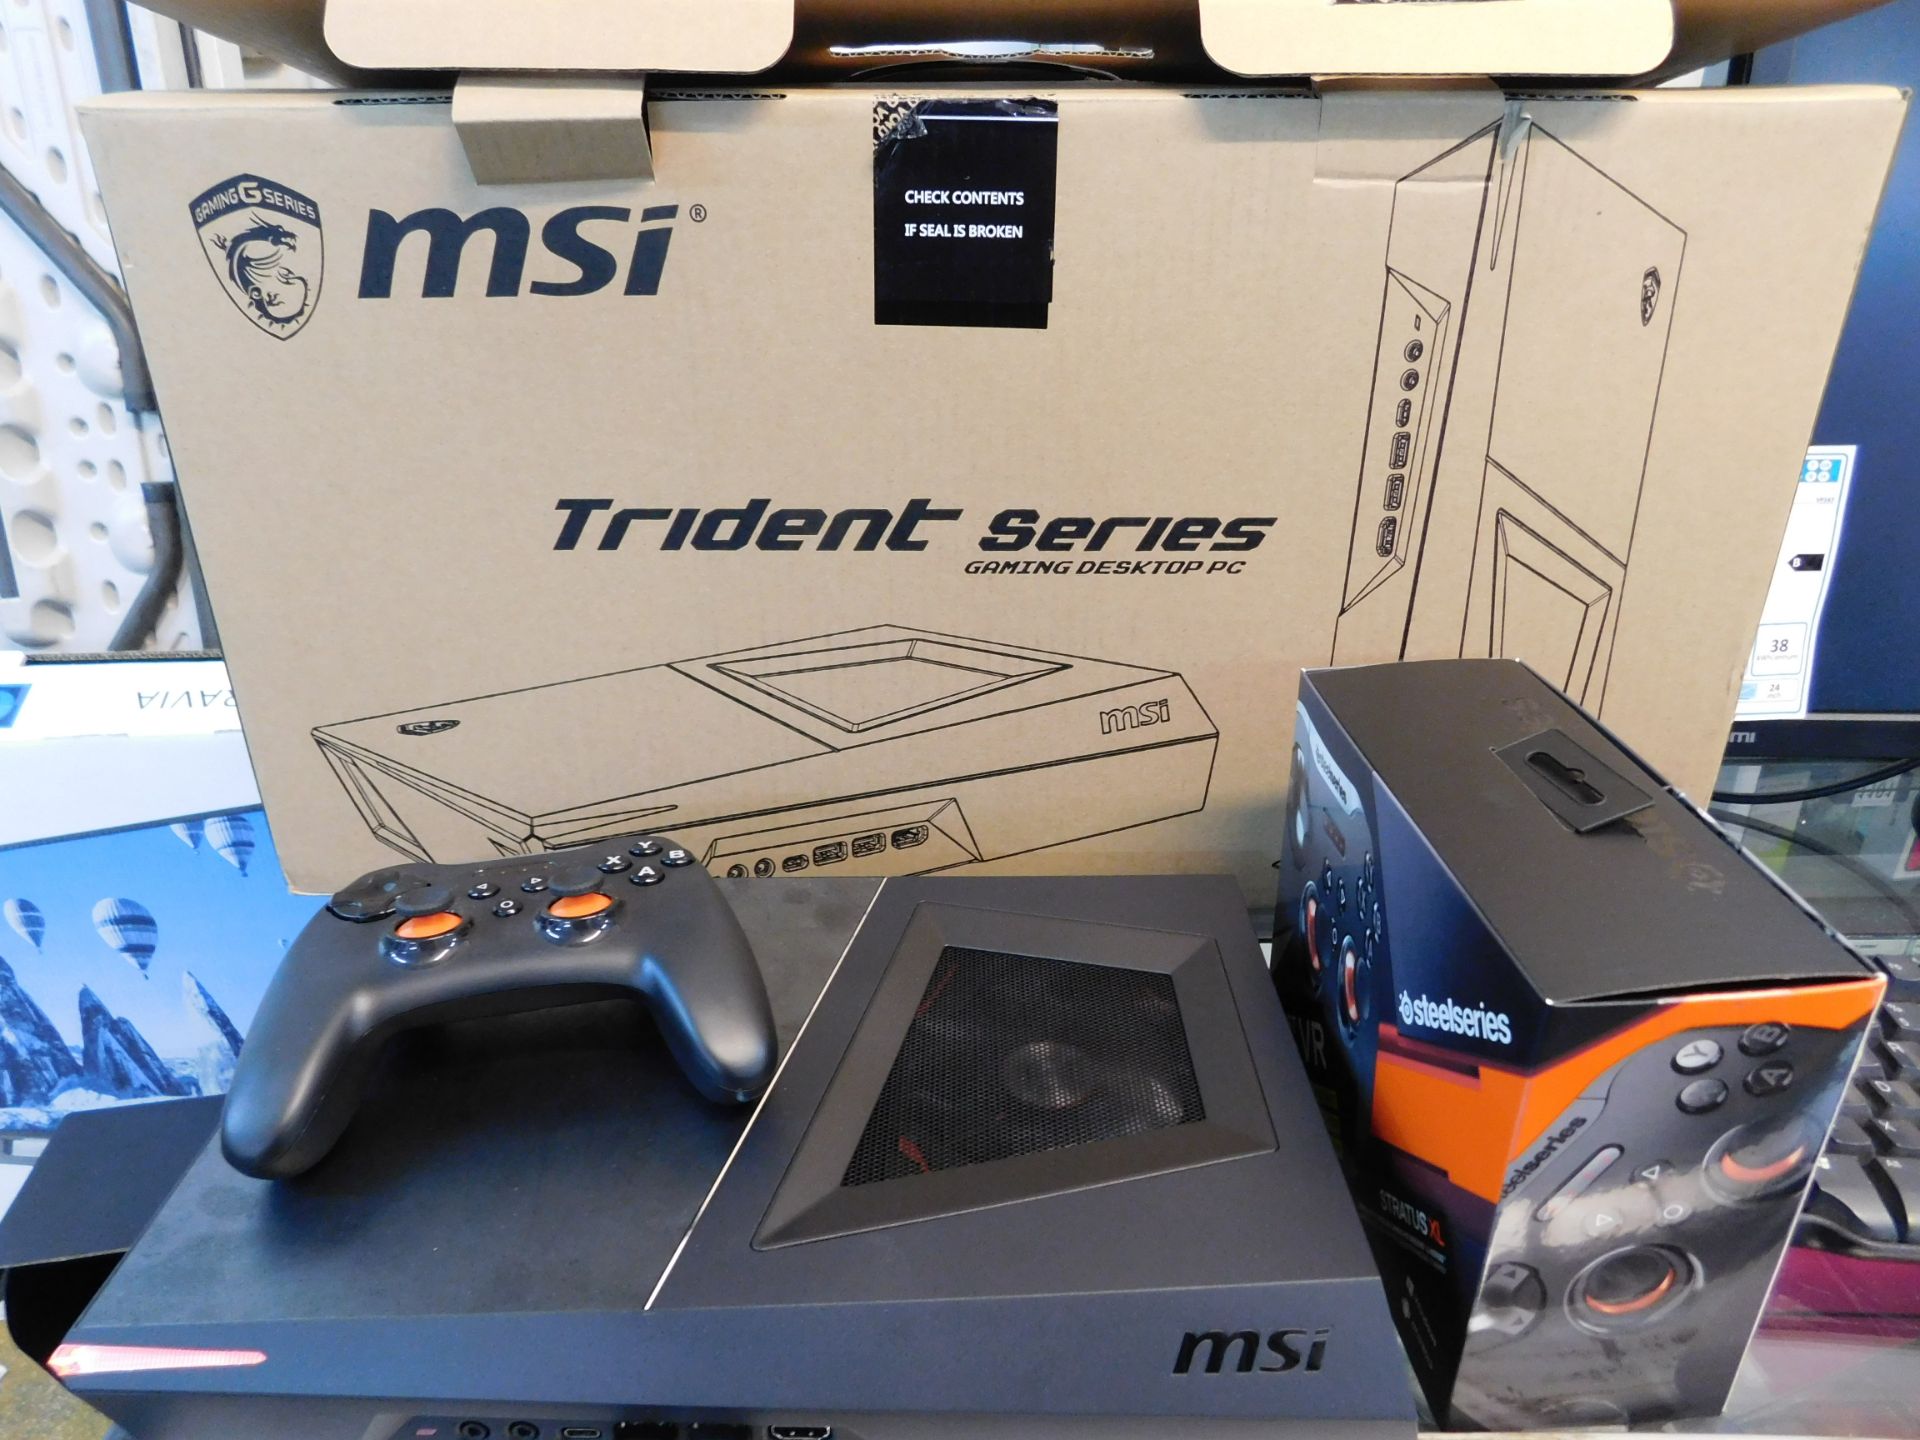 1 BOXED MSI TRIDENT 3 GAMING DESKTOP PC WITH STRATUS XL GAME PAD, INTEL CORE I5-7400, 1TB HD, 8GB